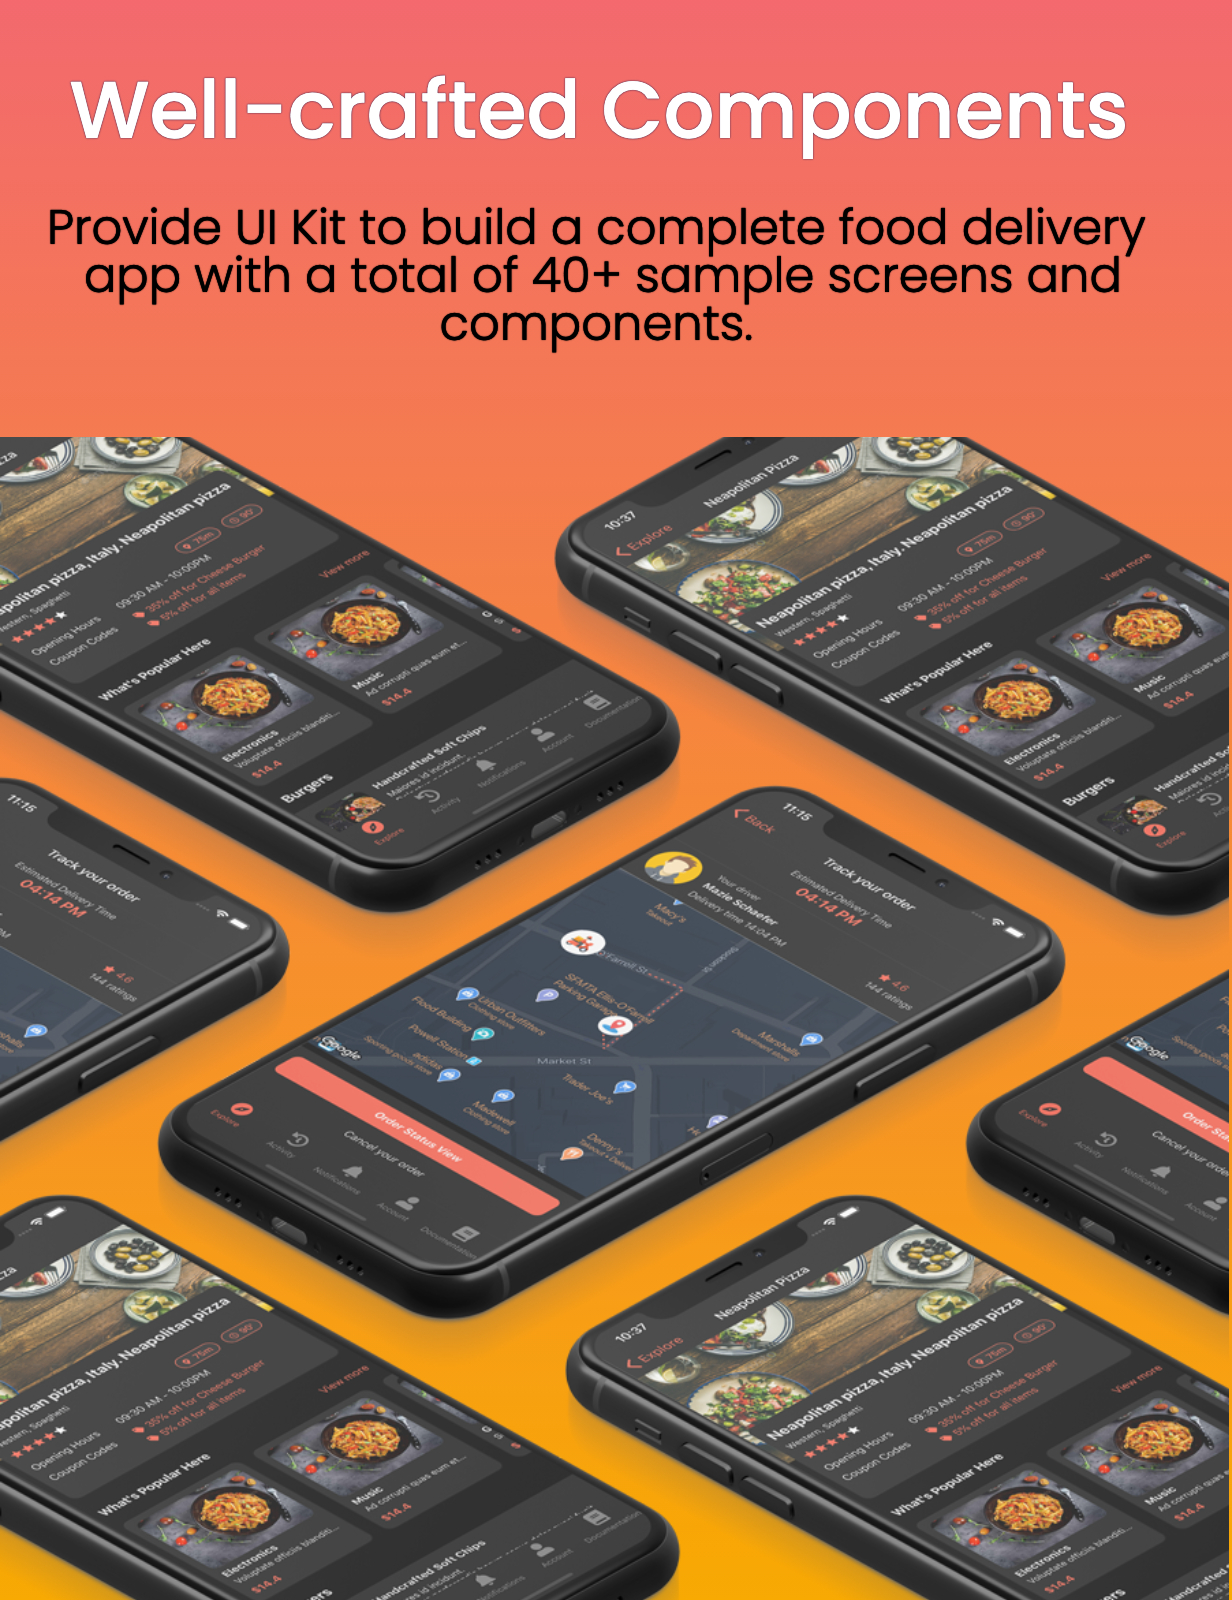 Food Star - Mobile React Native Food Delivery Template - 3